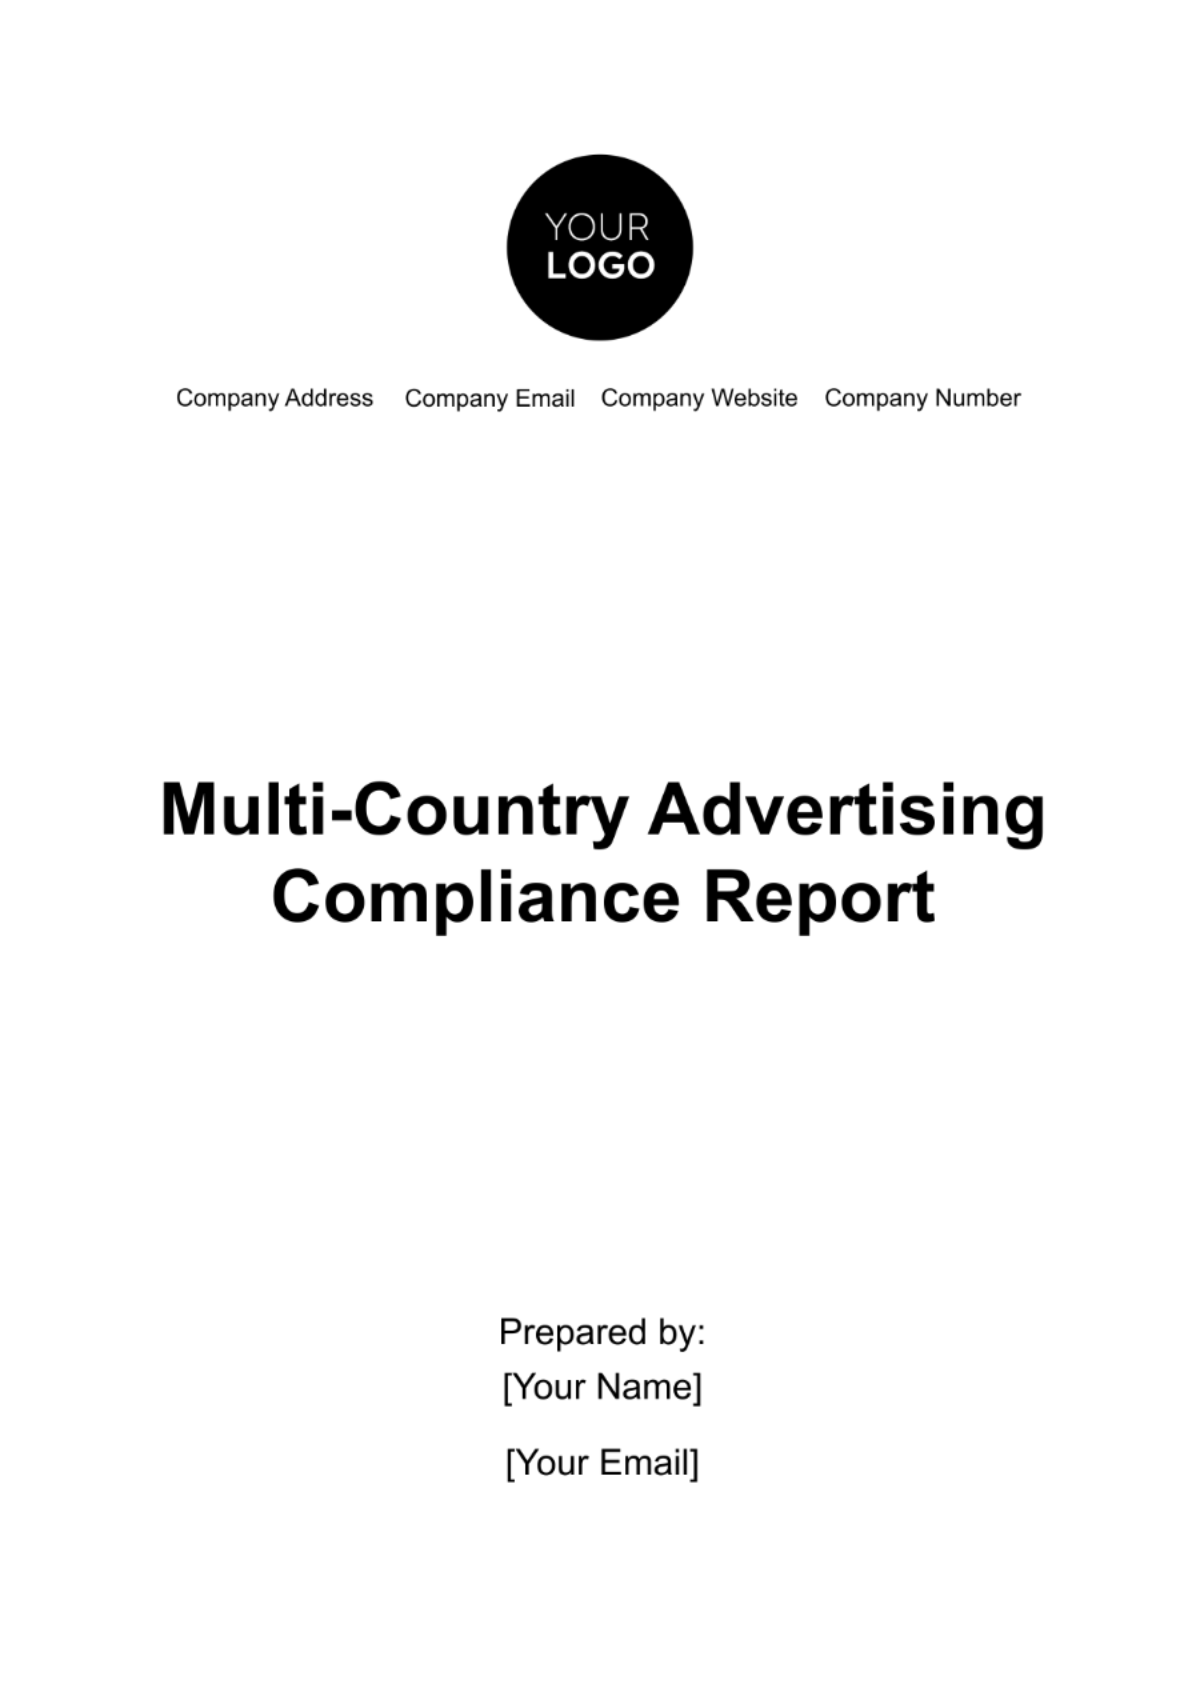 Free Multi-Country Advertising Compliance Report Template